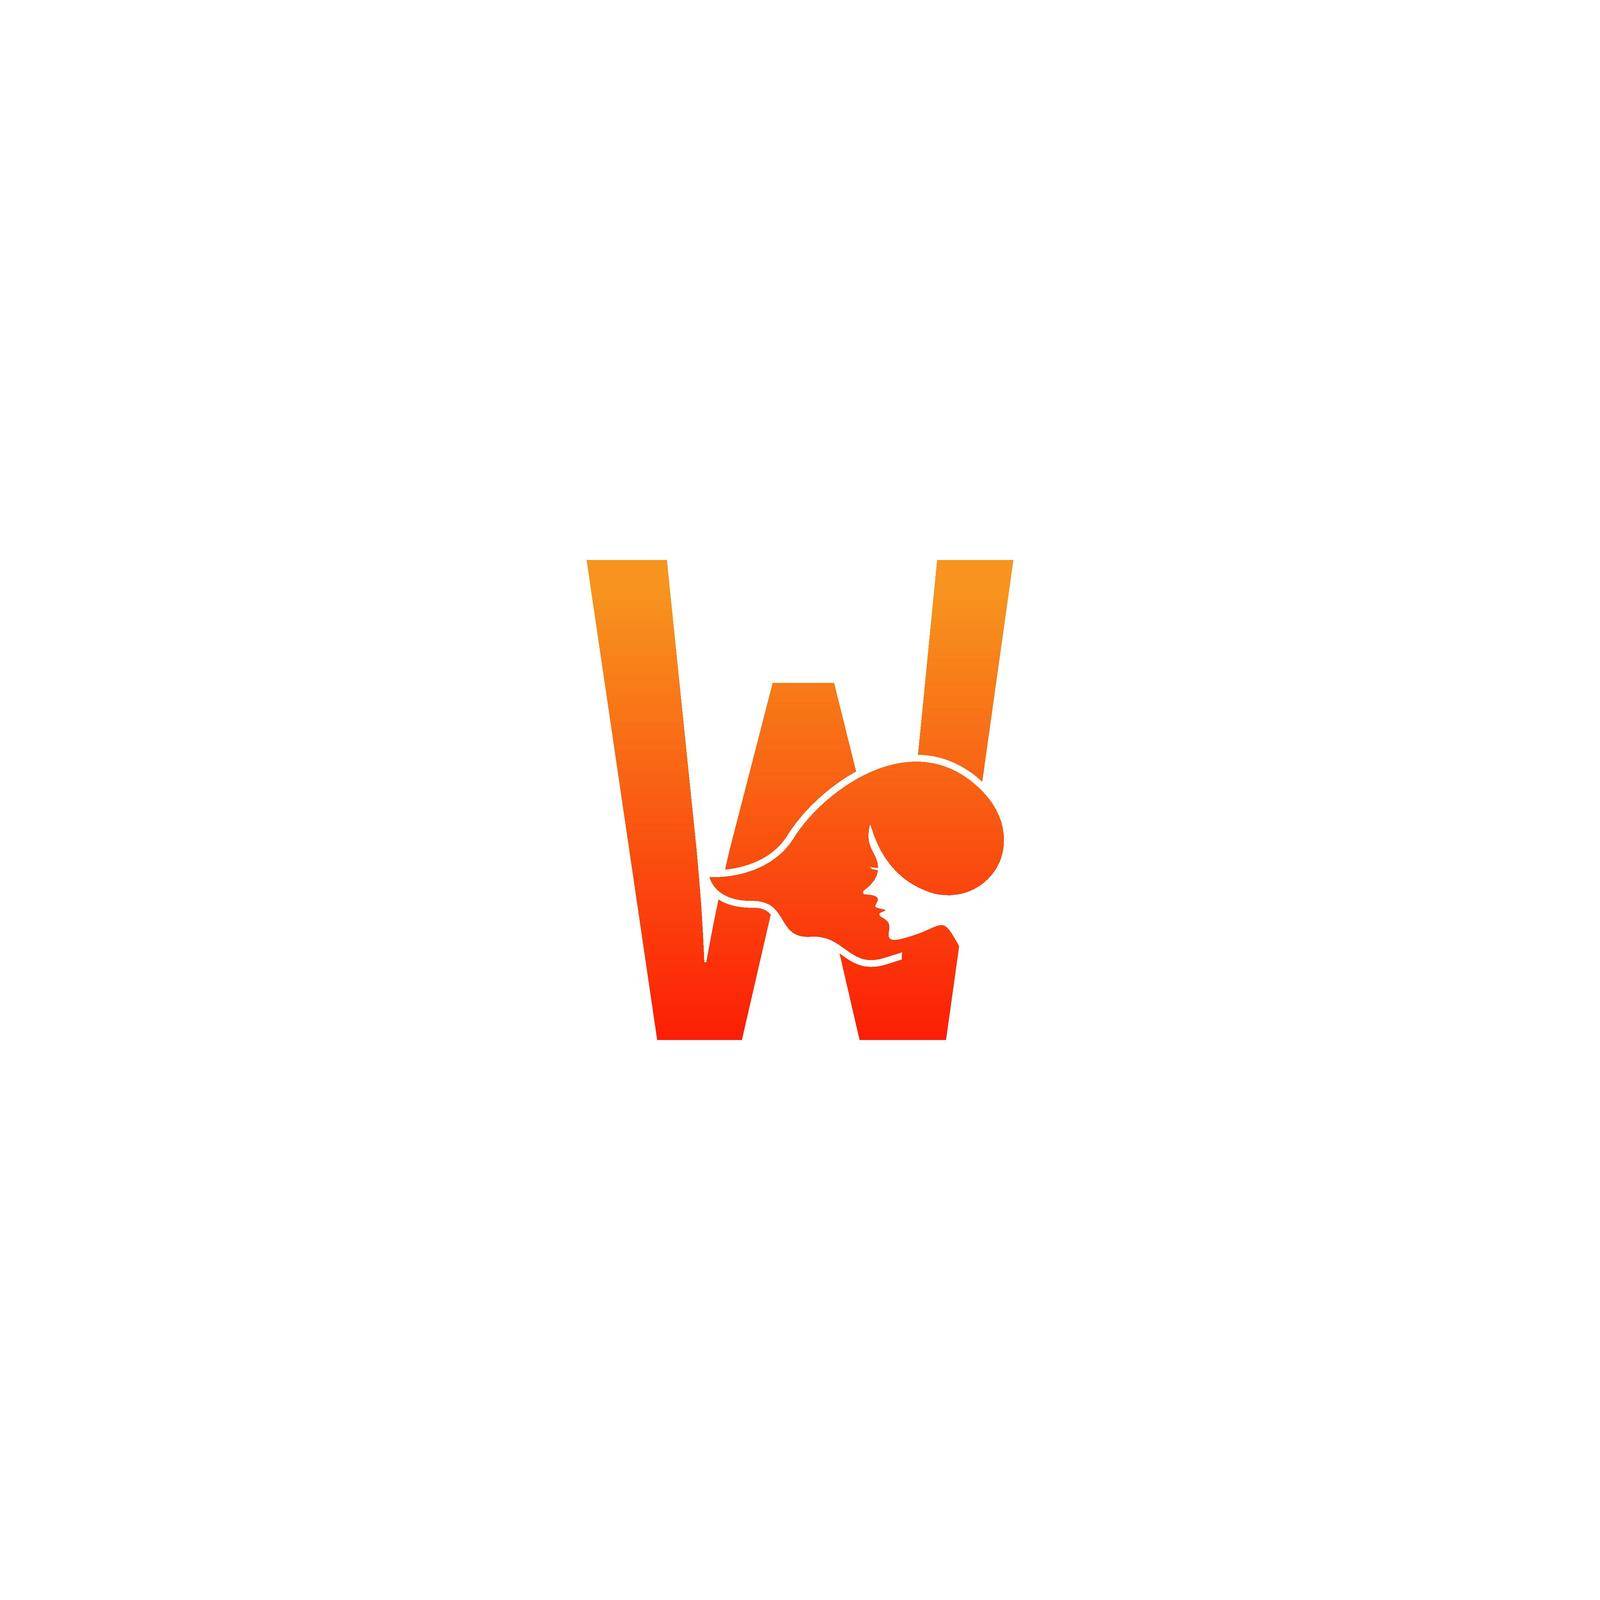 Letter W with woman face logo icon design vector by bellaxbudhong3